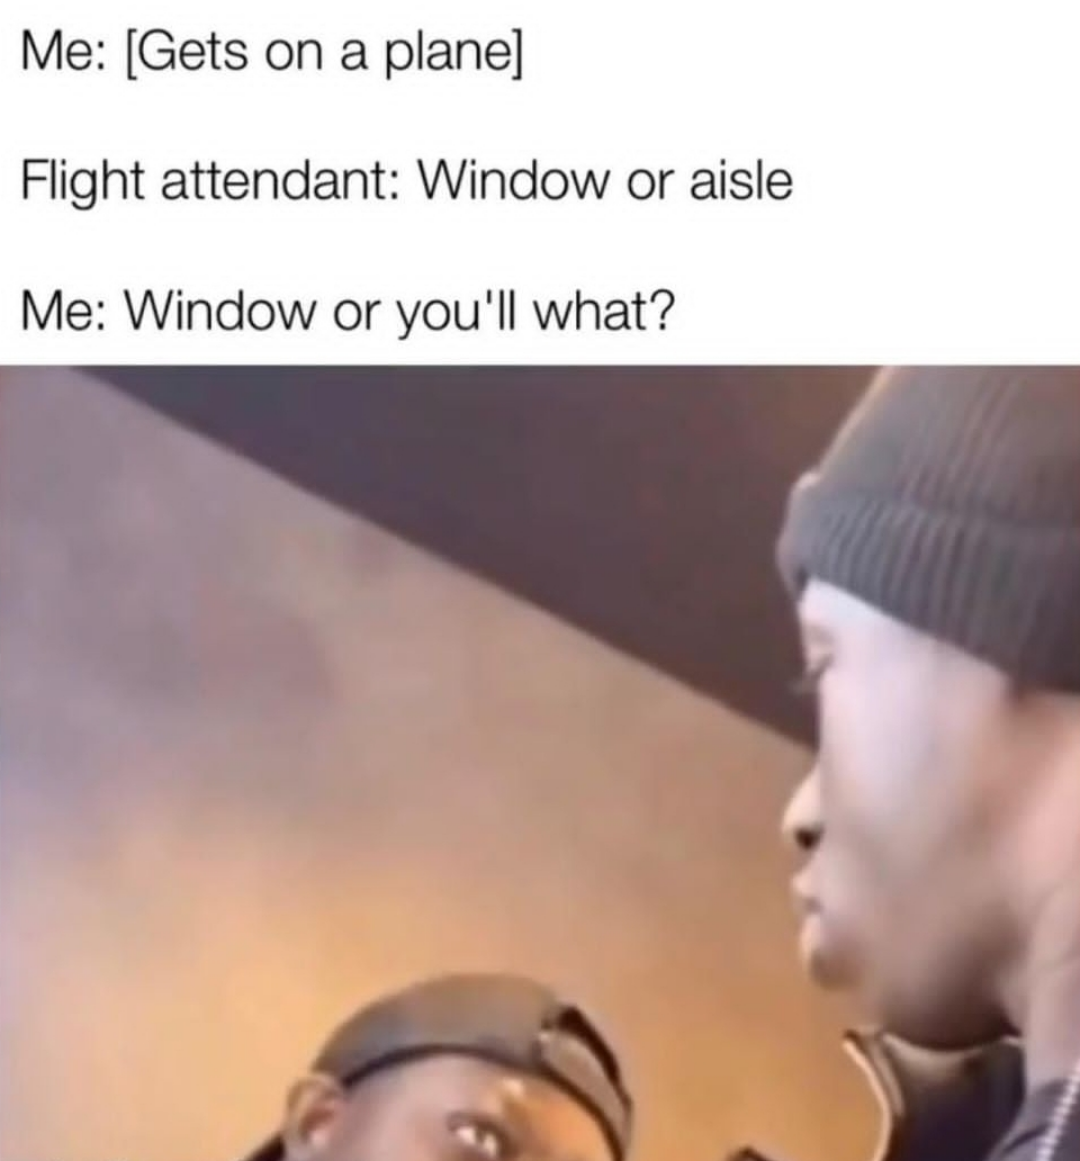 funny memes - window or aisle meme - Me Gets on a plane Flight attendant Window or aisle Me Window or you'll what?